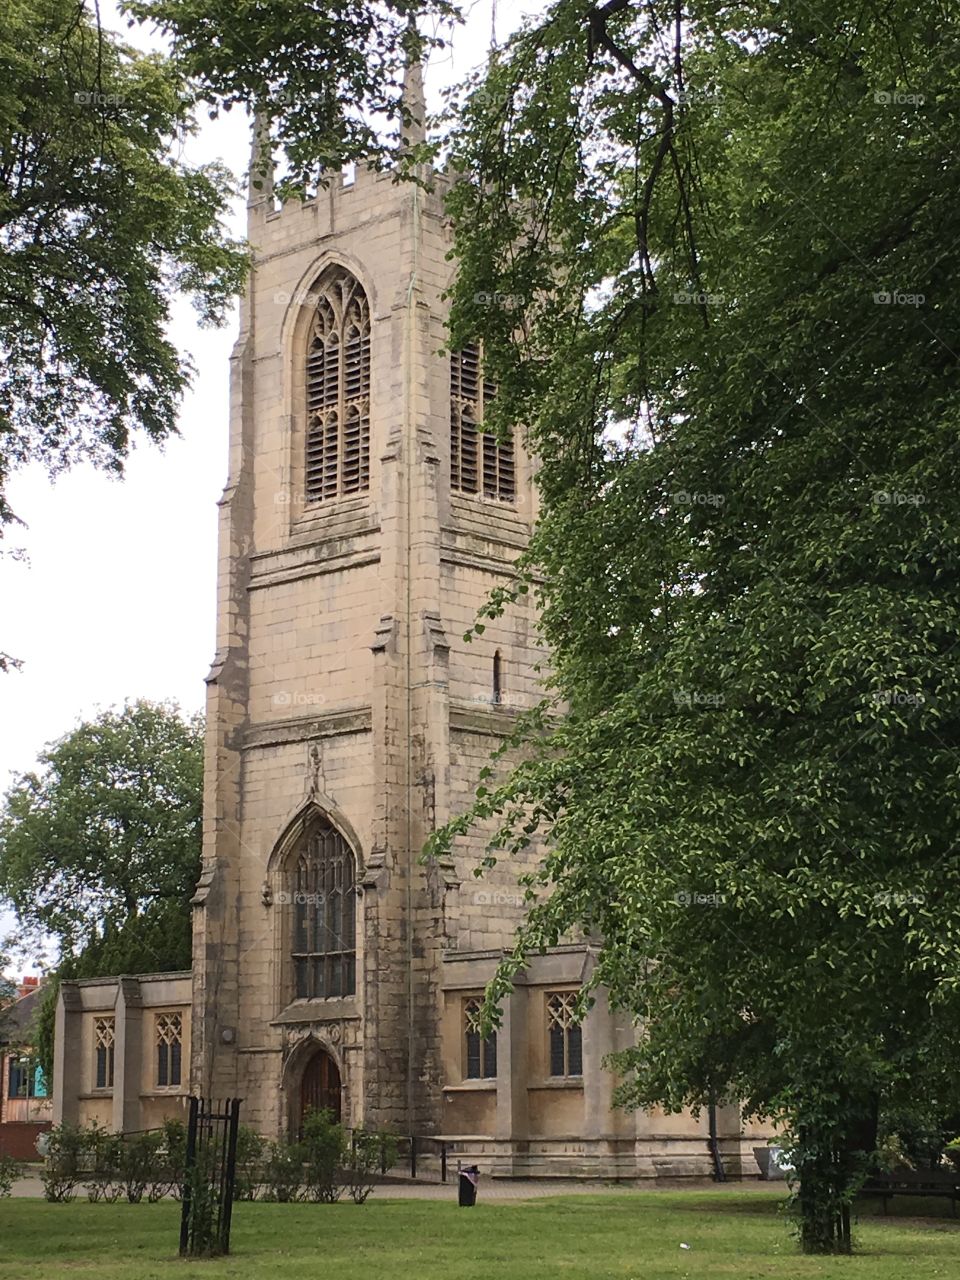 All Saints Church in Gainsborough, England with 15th Century tower, surrounded by trees